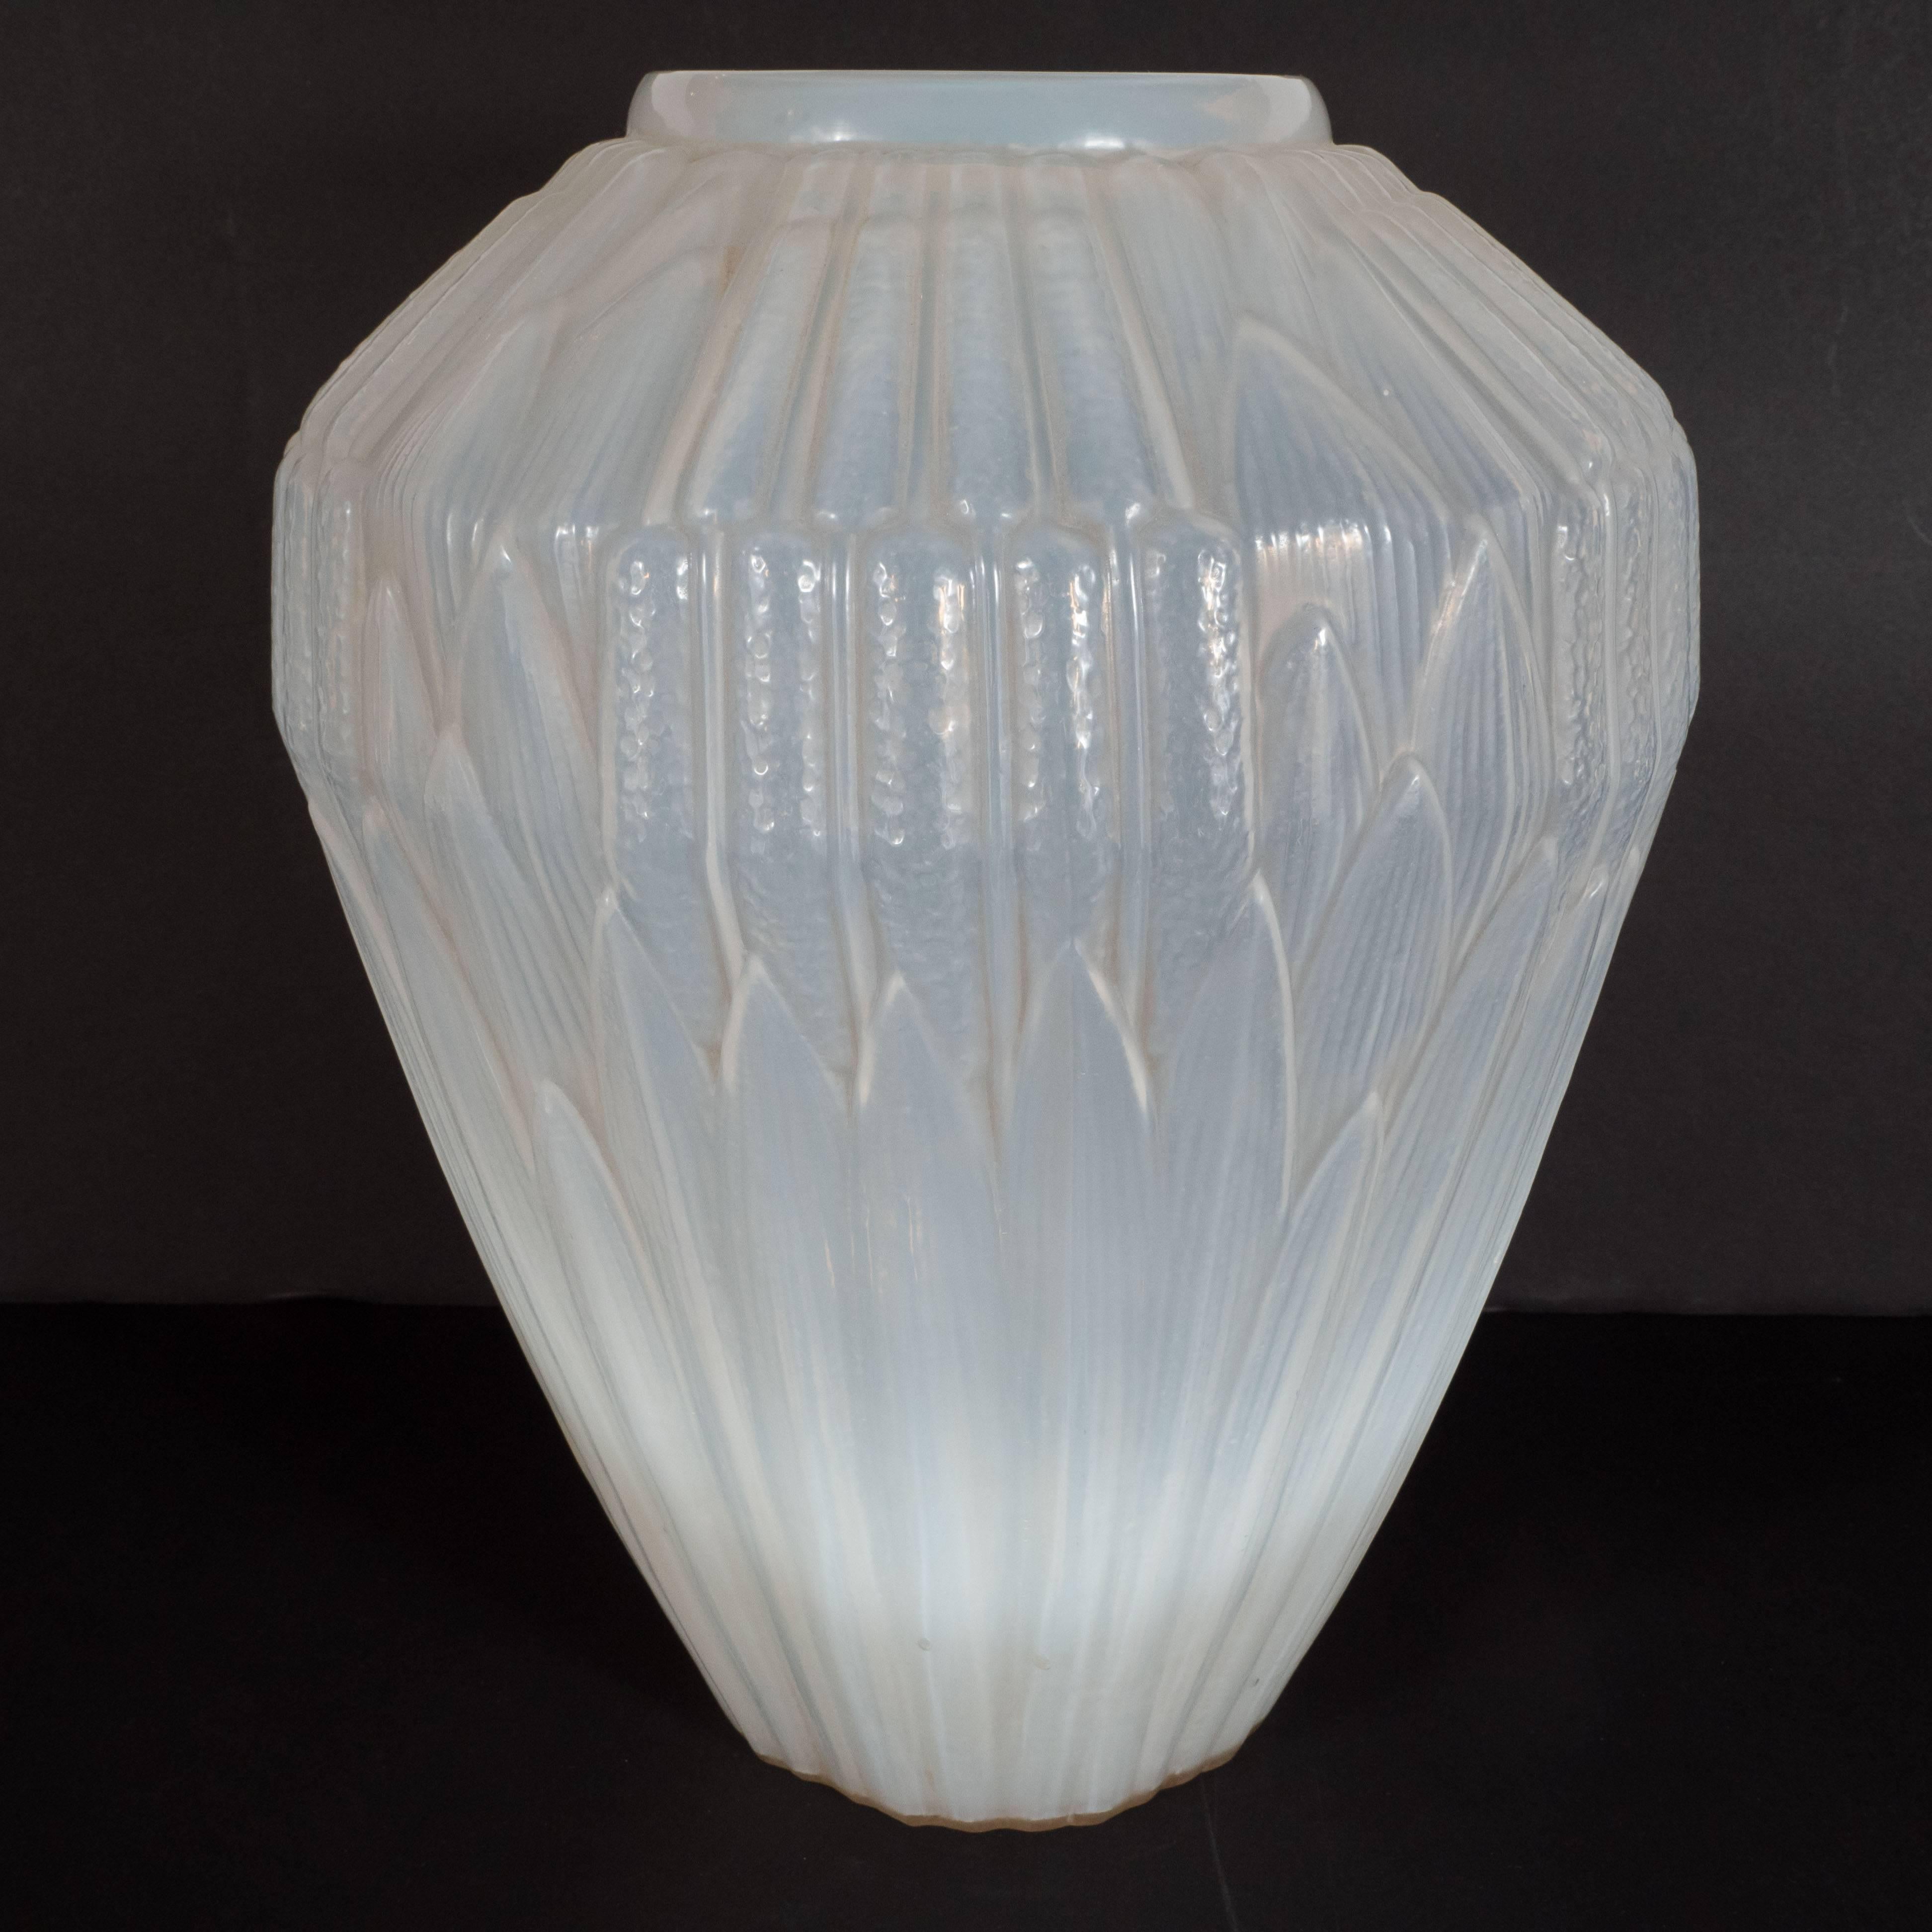 French Art Deco Opalescent Handblown Vase with Geometric Patterns by Andre Hunebelle